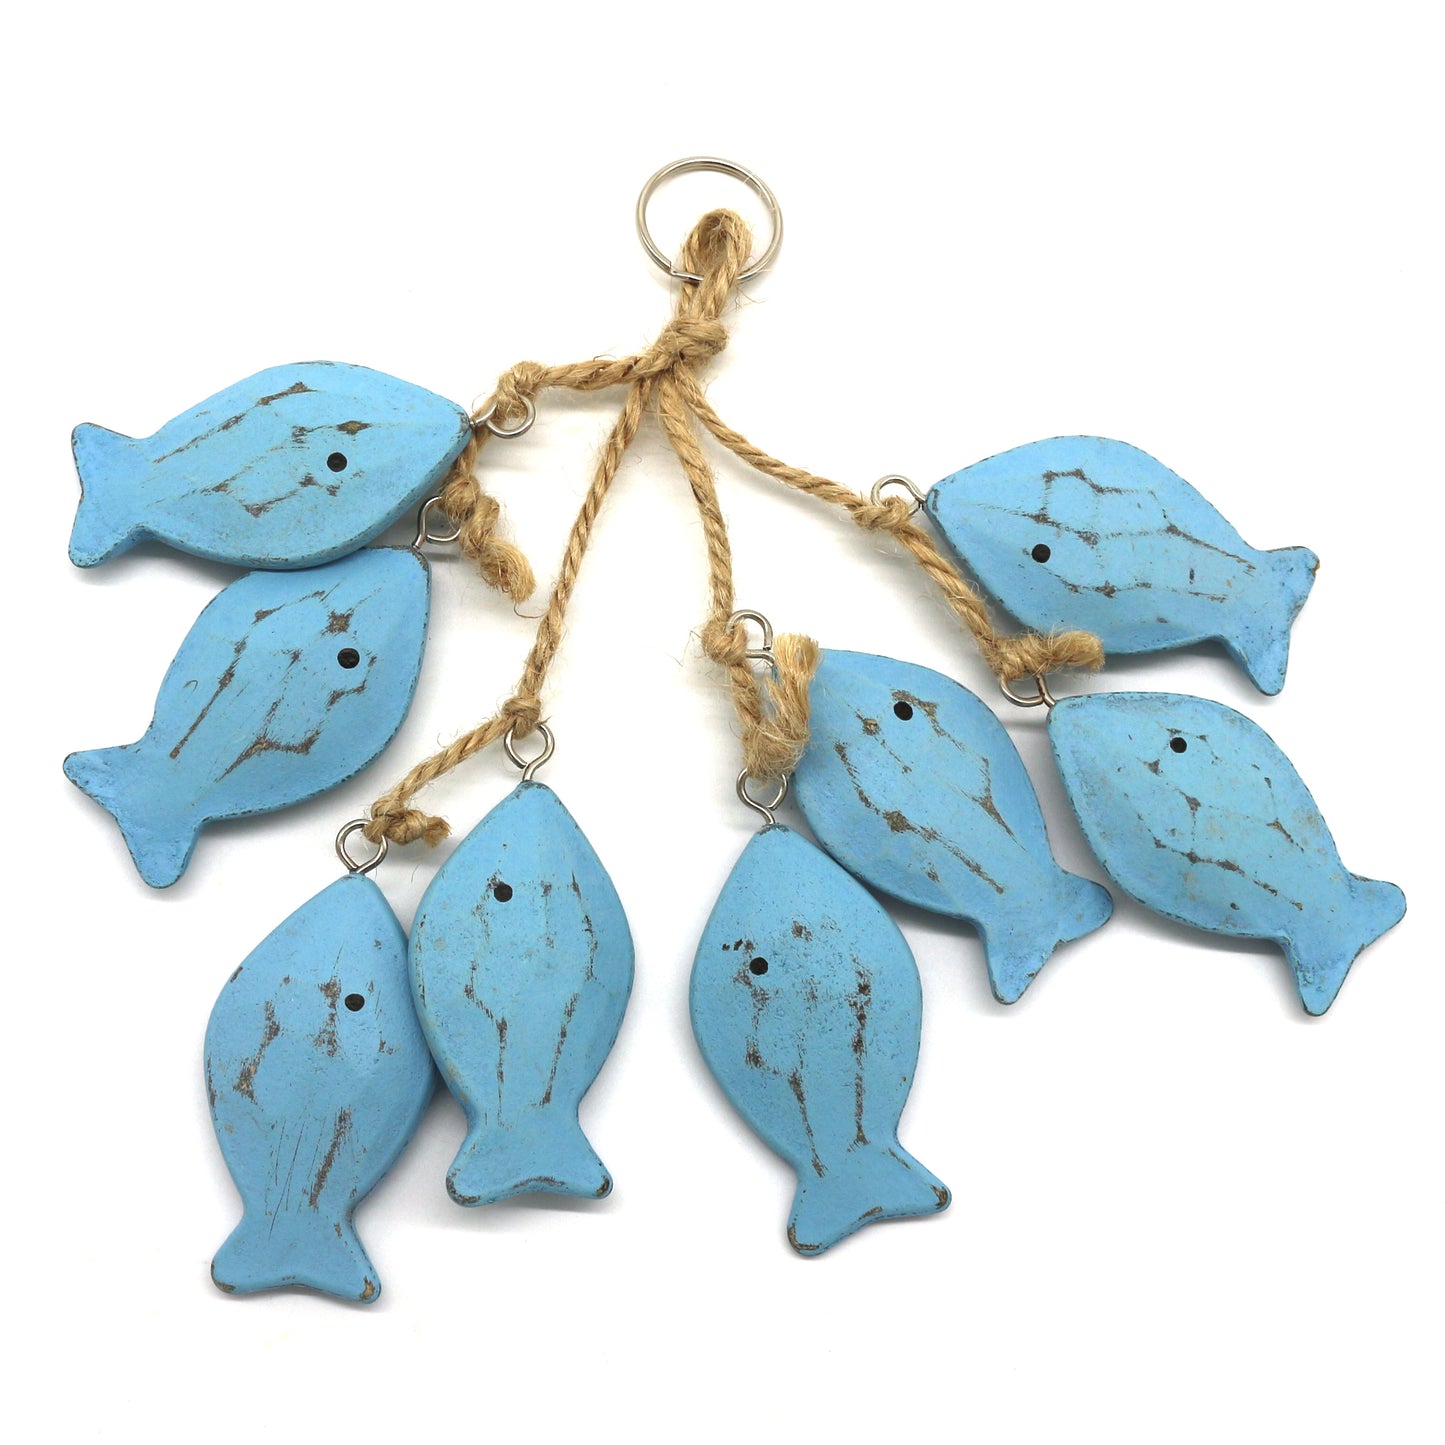 CVHOMEDECO. 3 Inches Hand Carved Wood Fish Hanging with Jute Rope Nautical Decorated, Mediterranean Style For Wall Hanging Gift Crafts, Blue, 8 pcs / set (Fish)